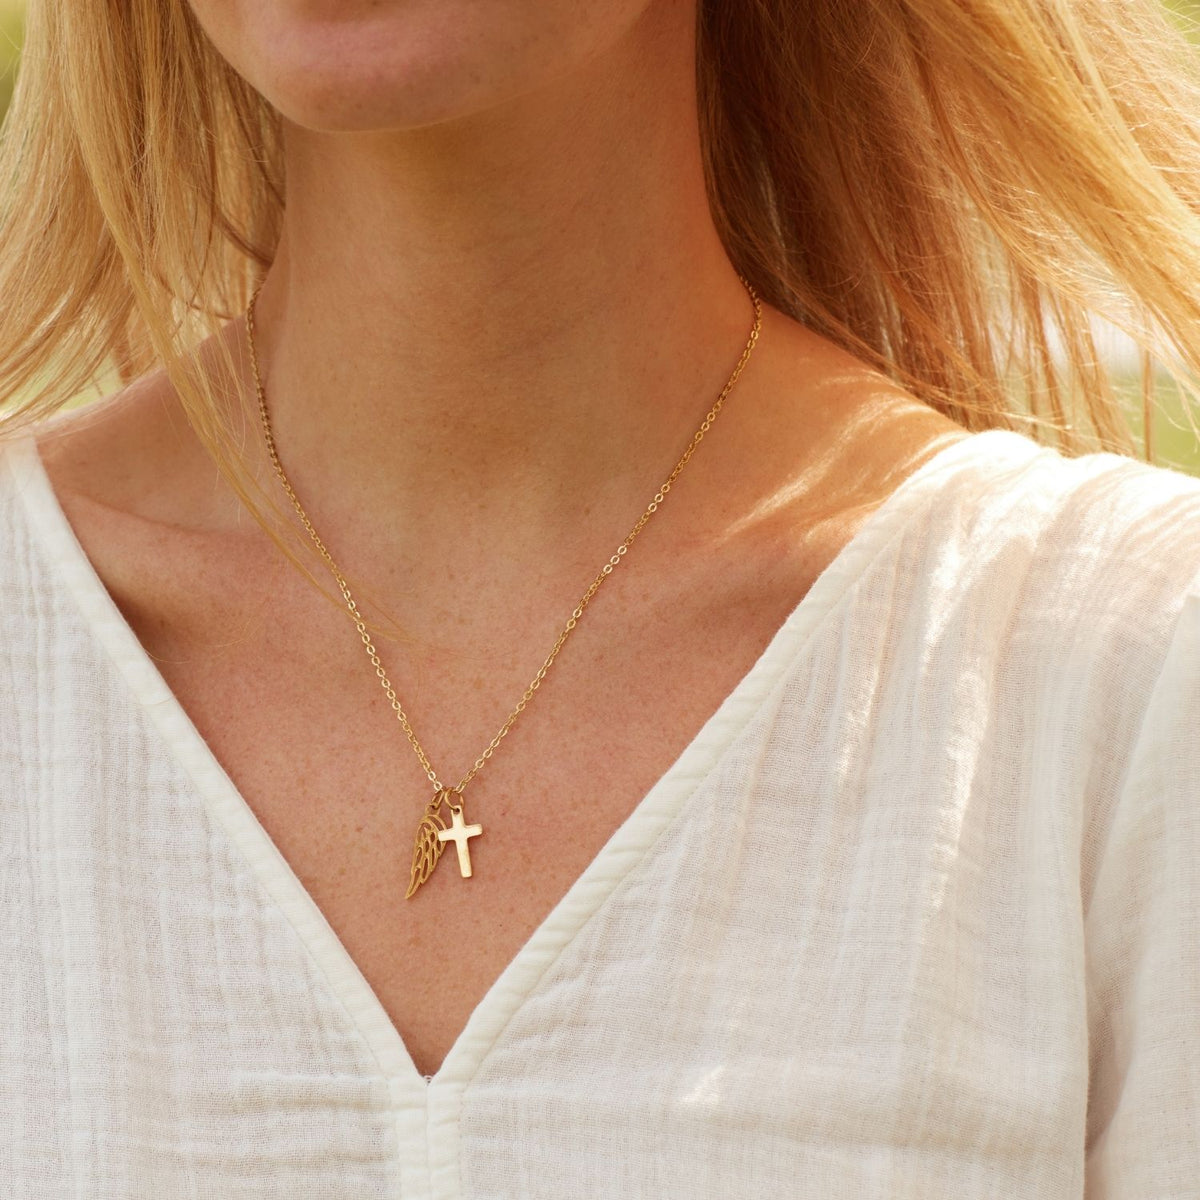 Gift for New Chapter | You Got This | Cross Necklace